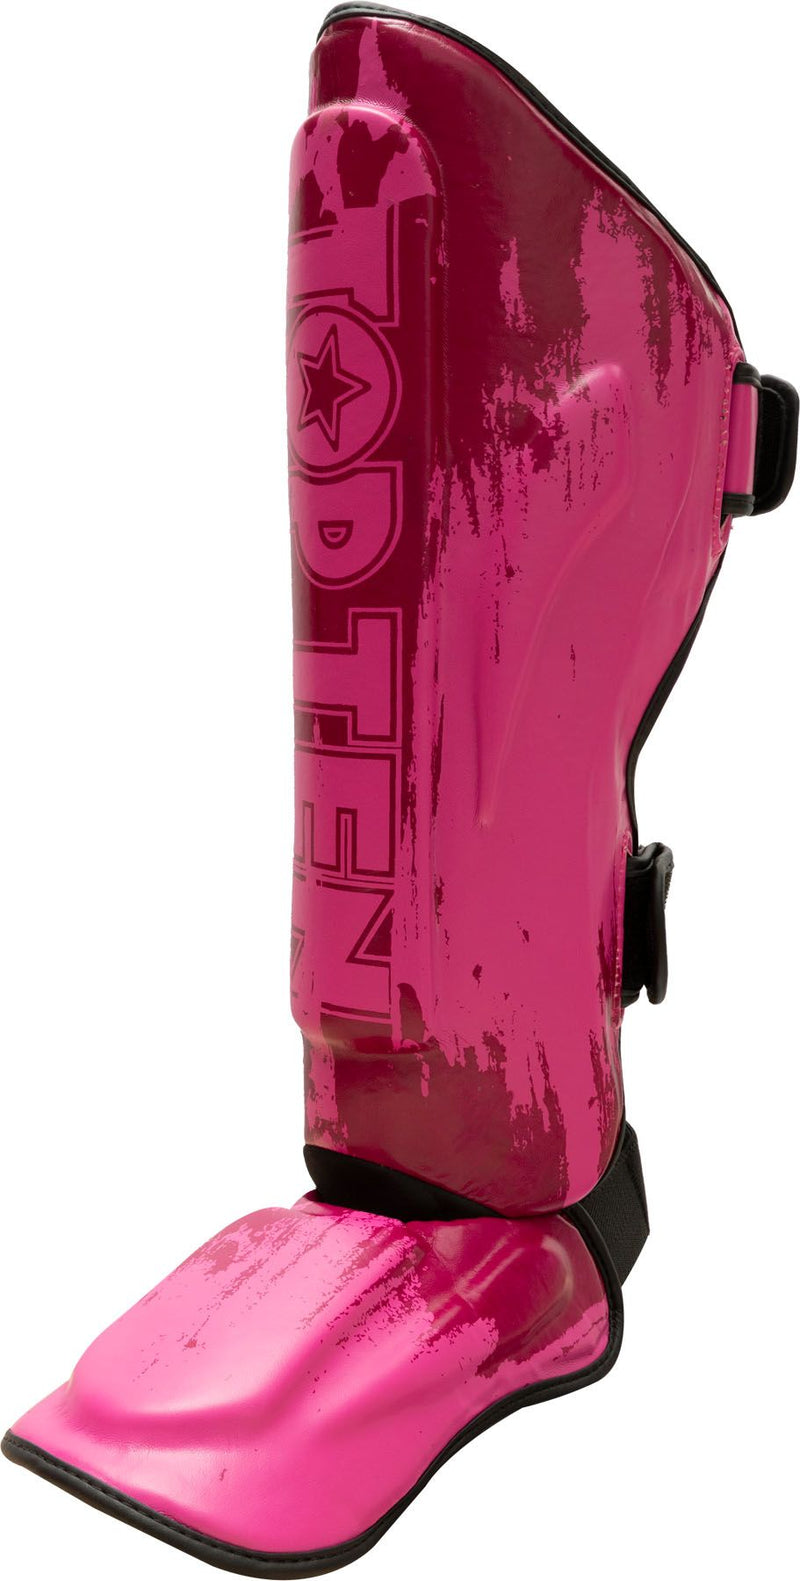 Top Ten Shin- and Instep Guard “Power Ink” - pink